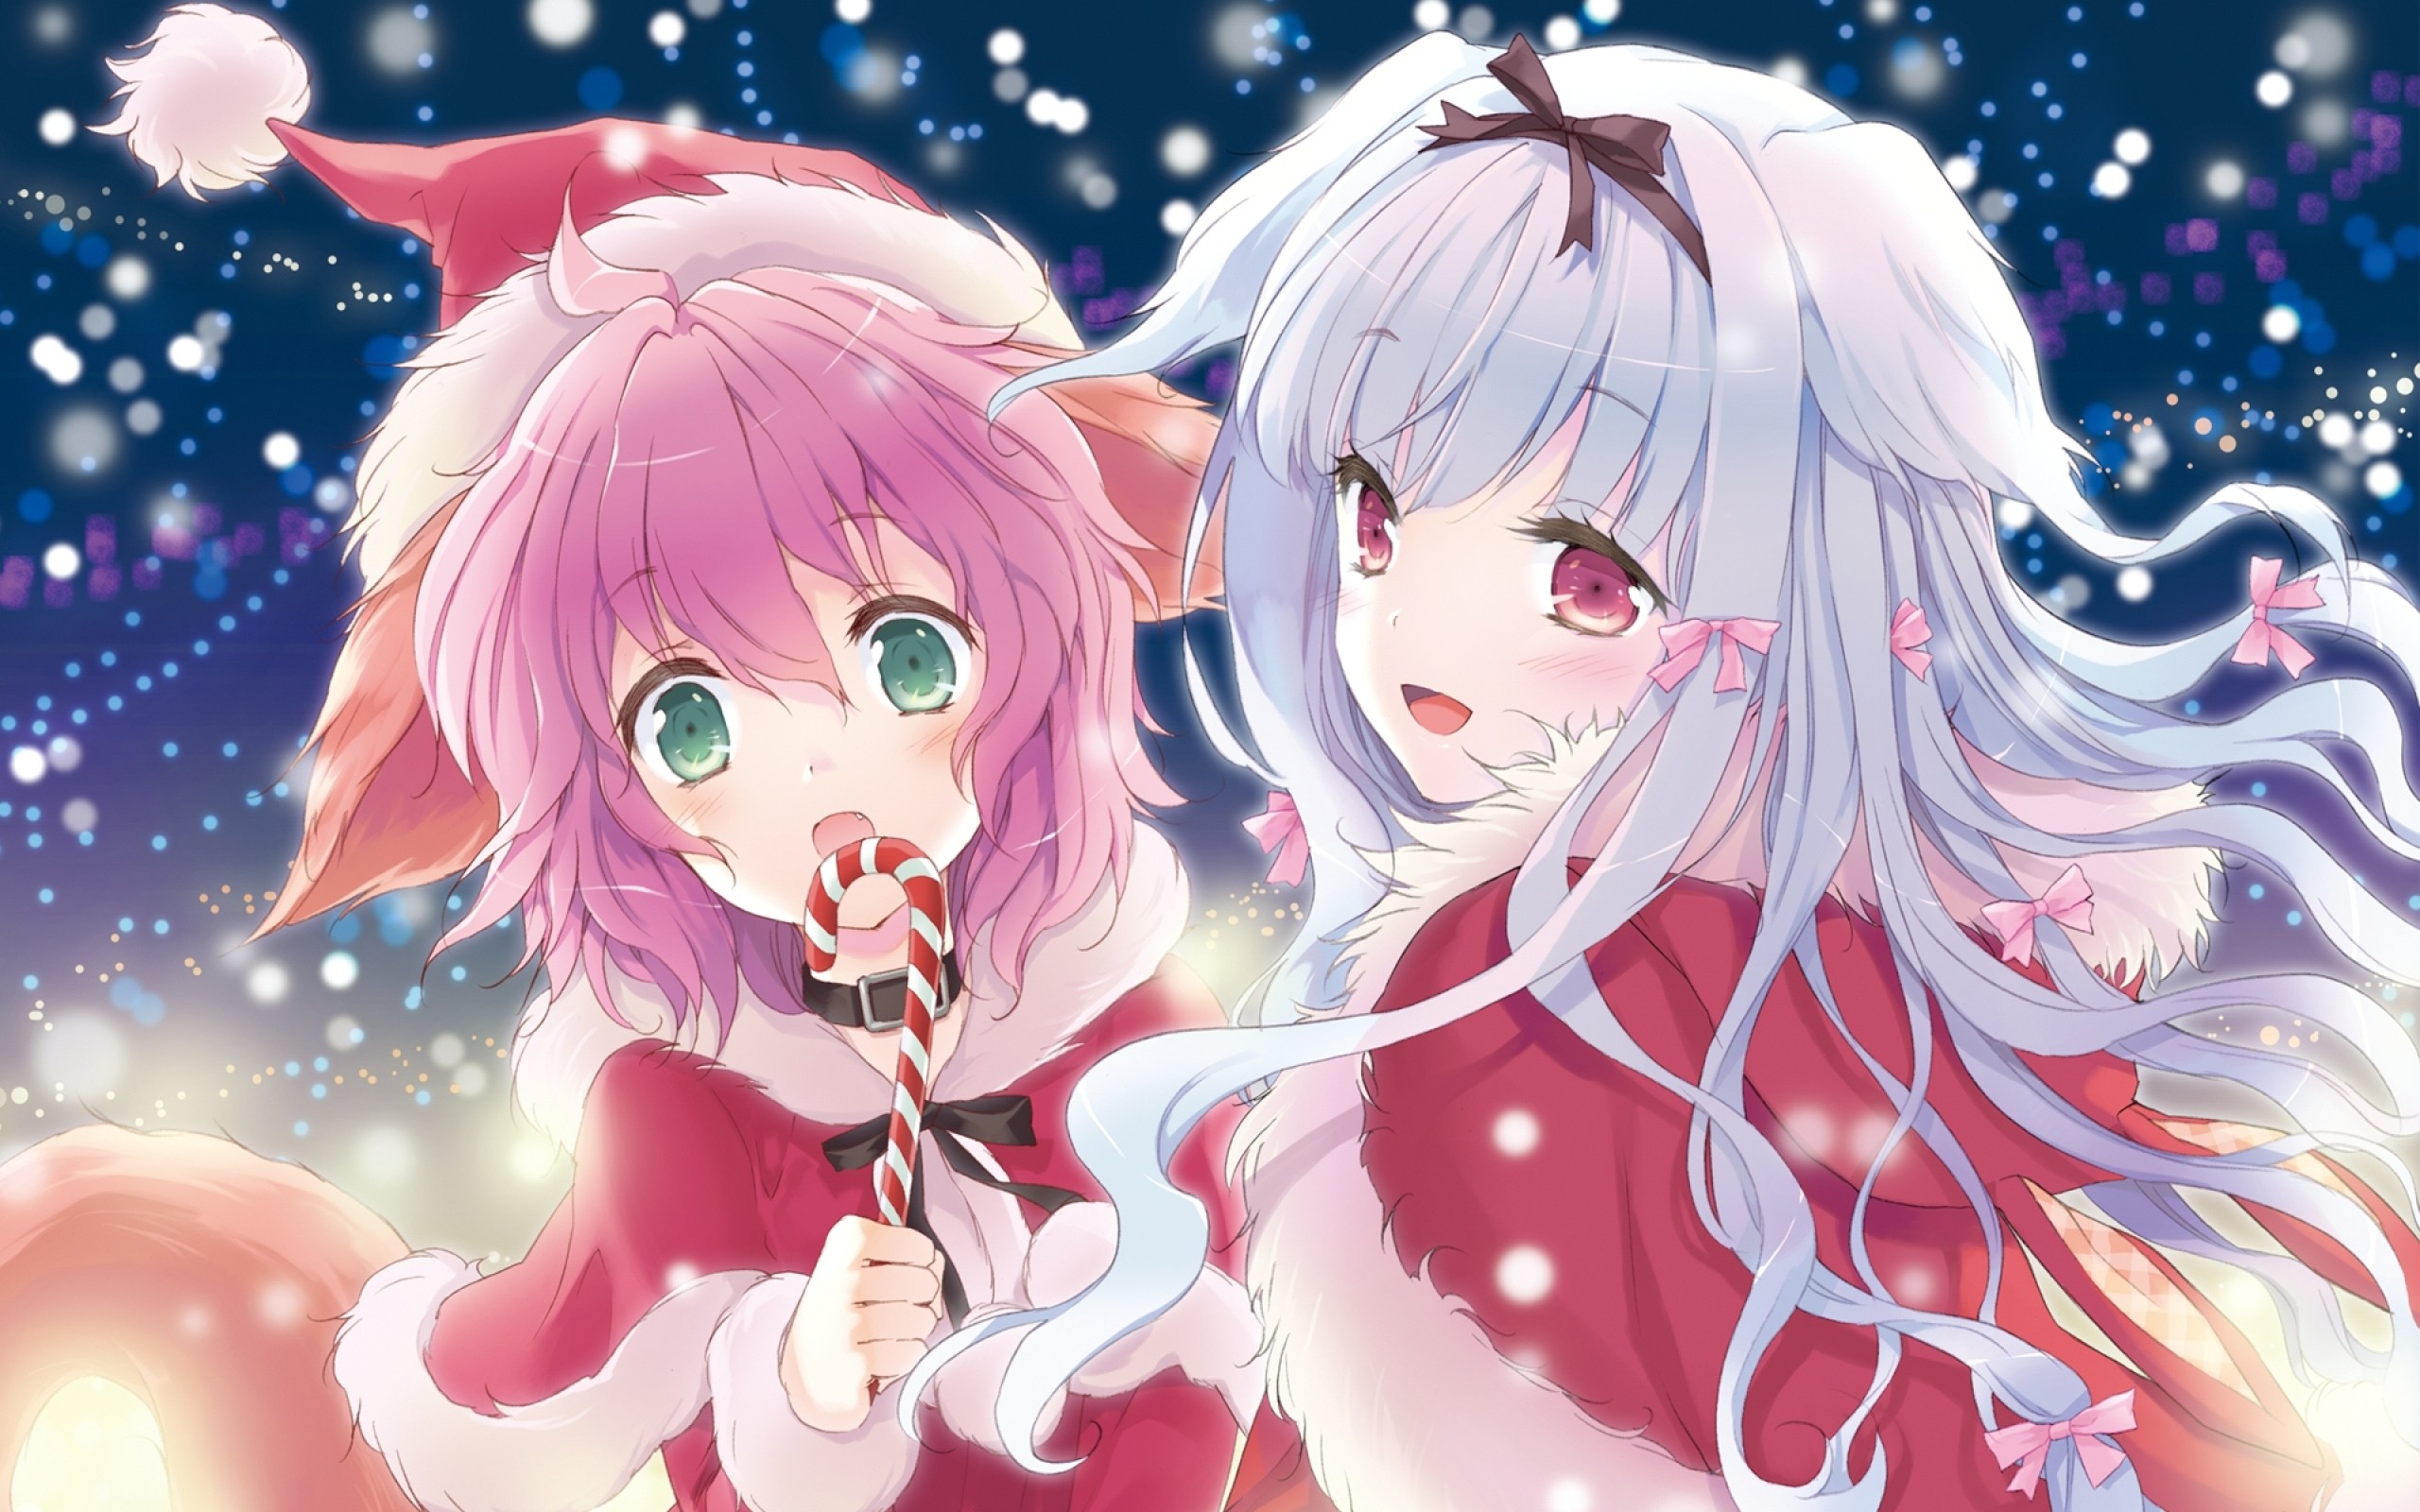 Anime Christmas wallpaper ·① Download free awesome HD backgrounds for